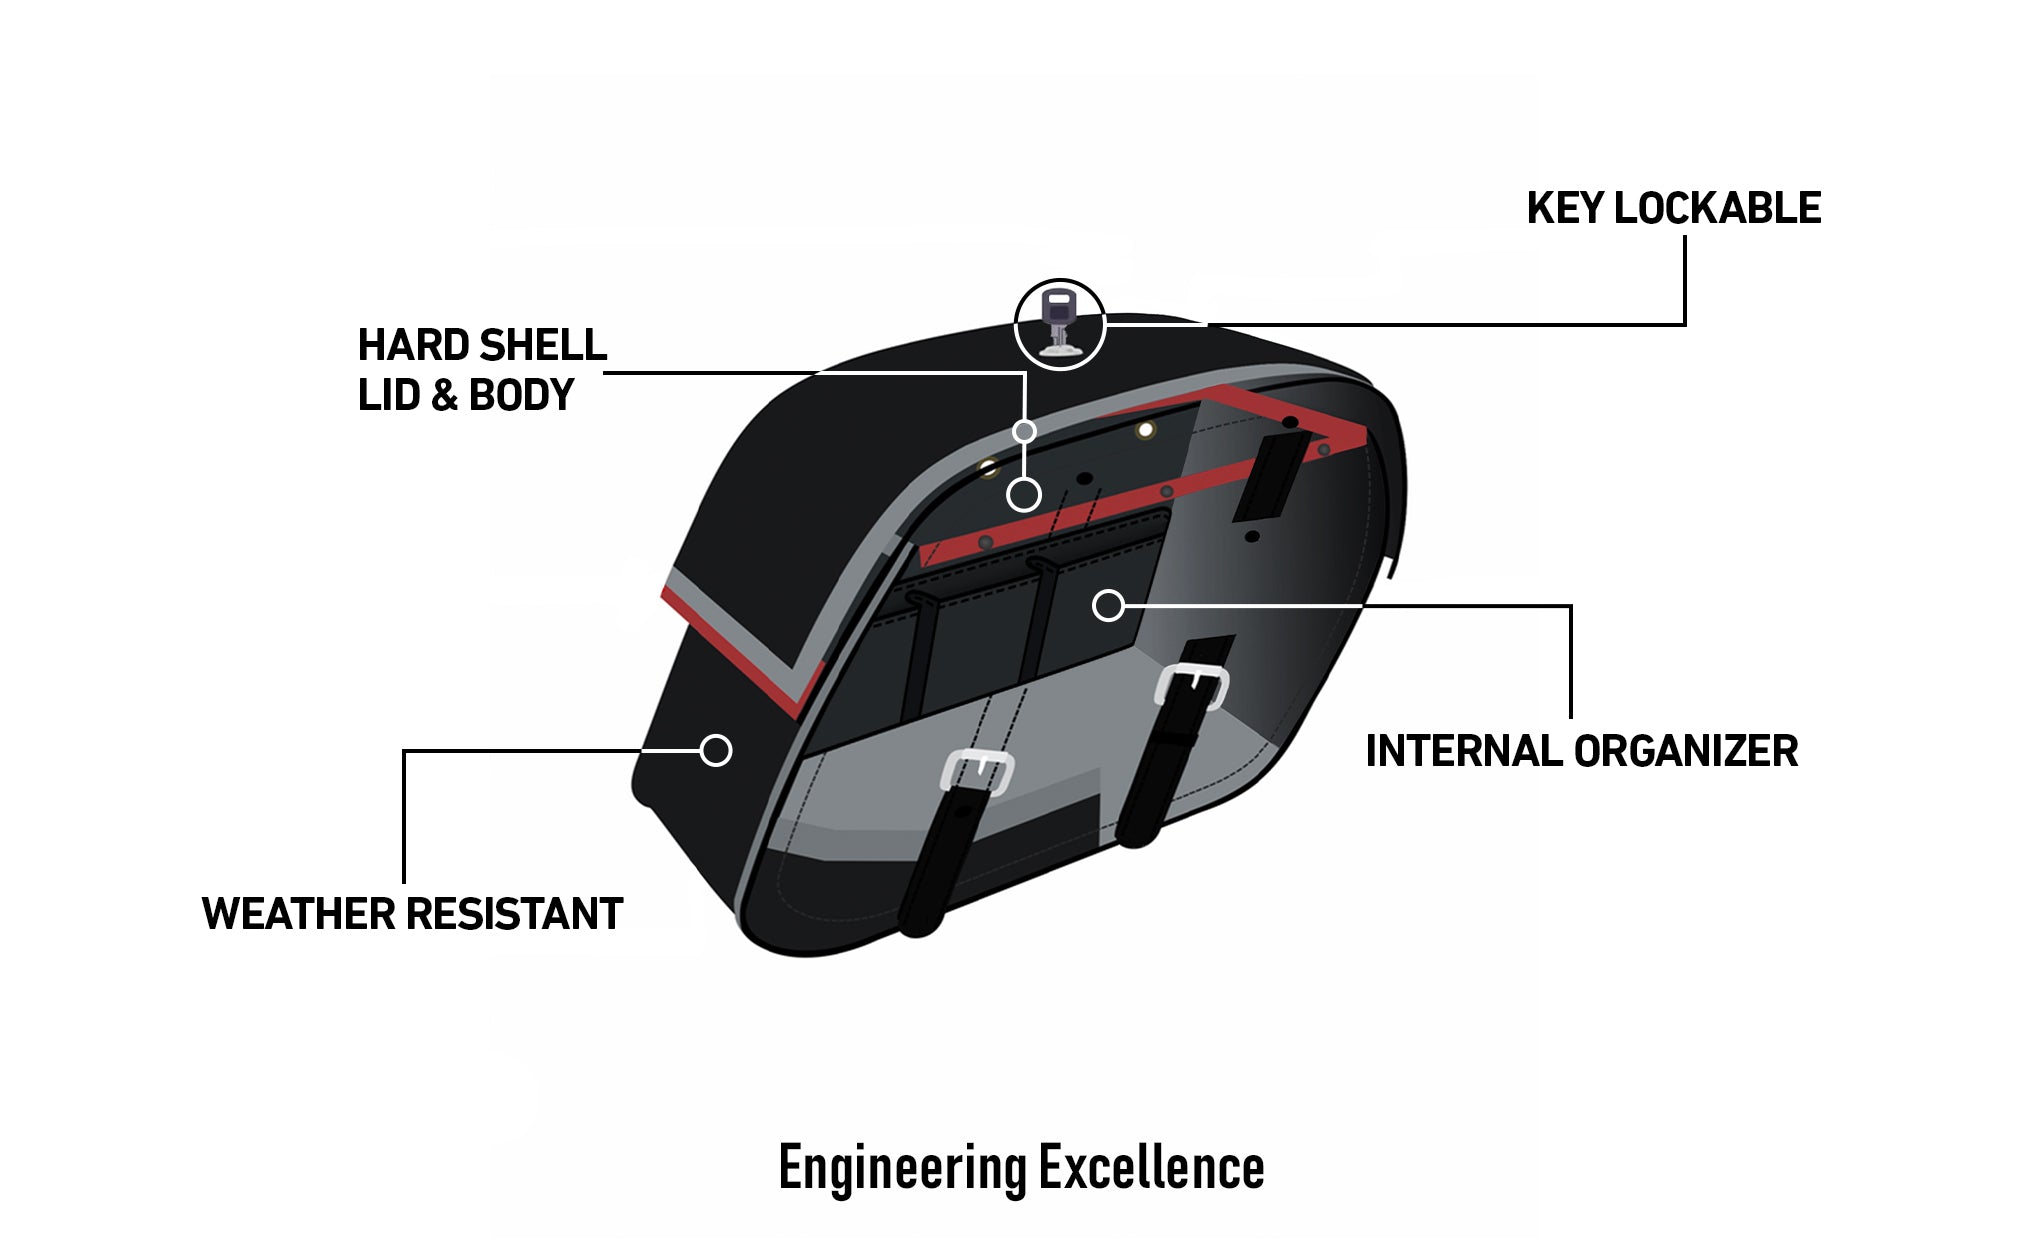 Viking Raven Large Motorcycle Leather Saddlebags For Harley Softail Breakout Fxsb Engineering Excellence with Bag on Bike @expand